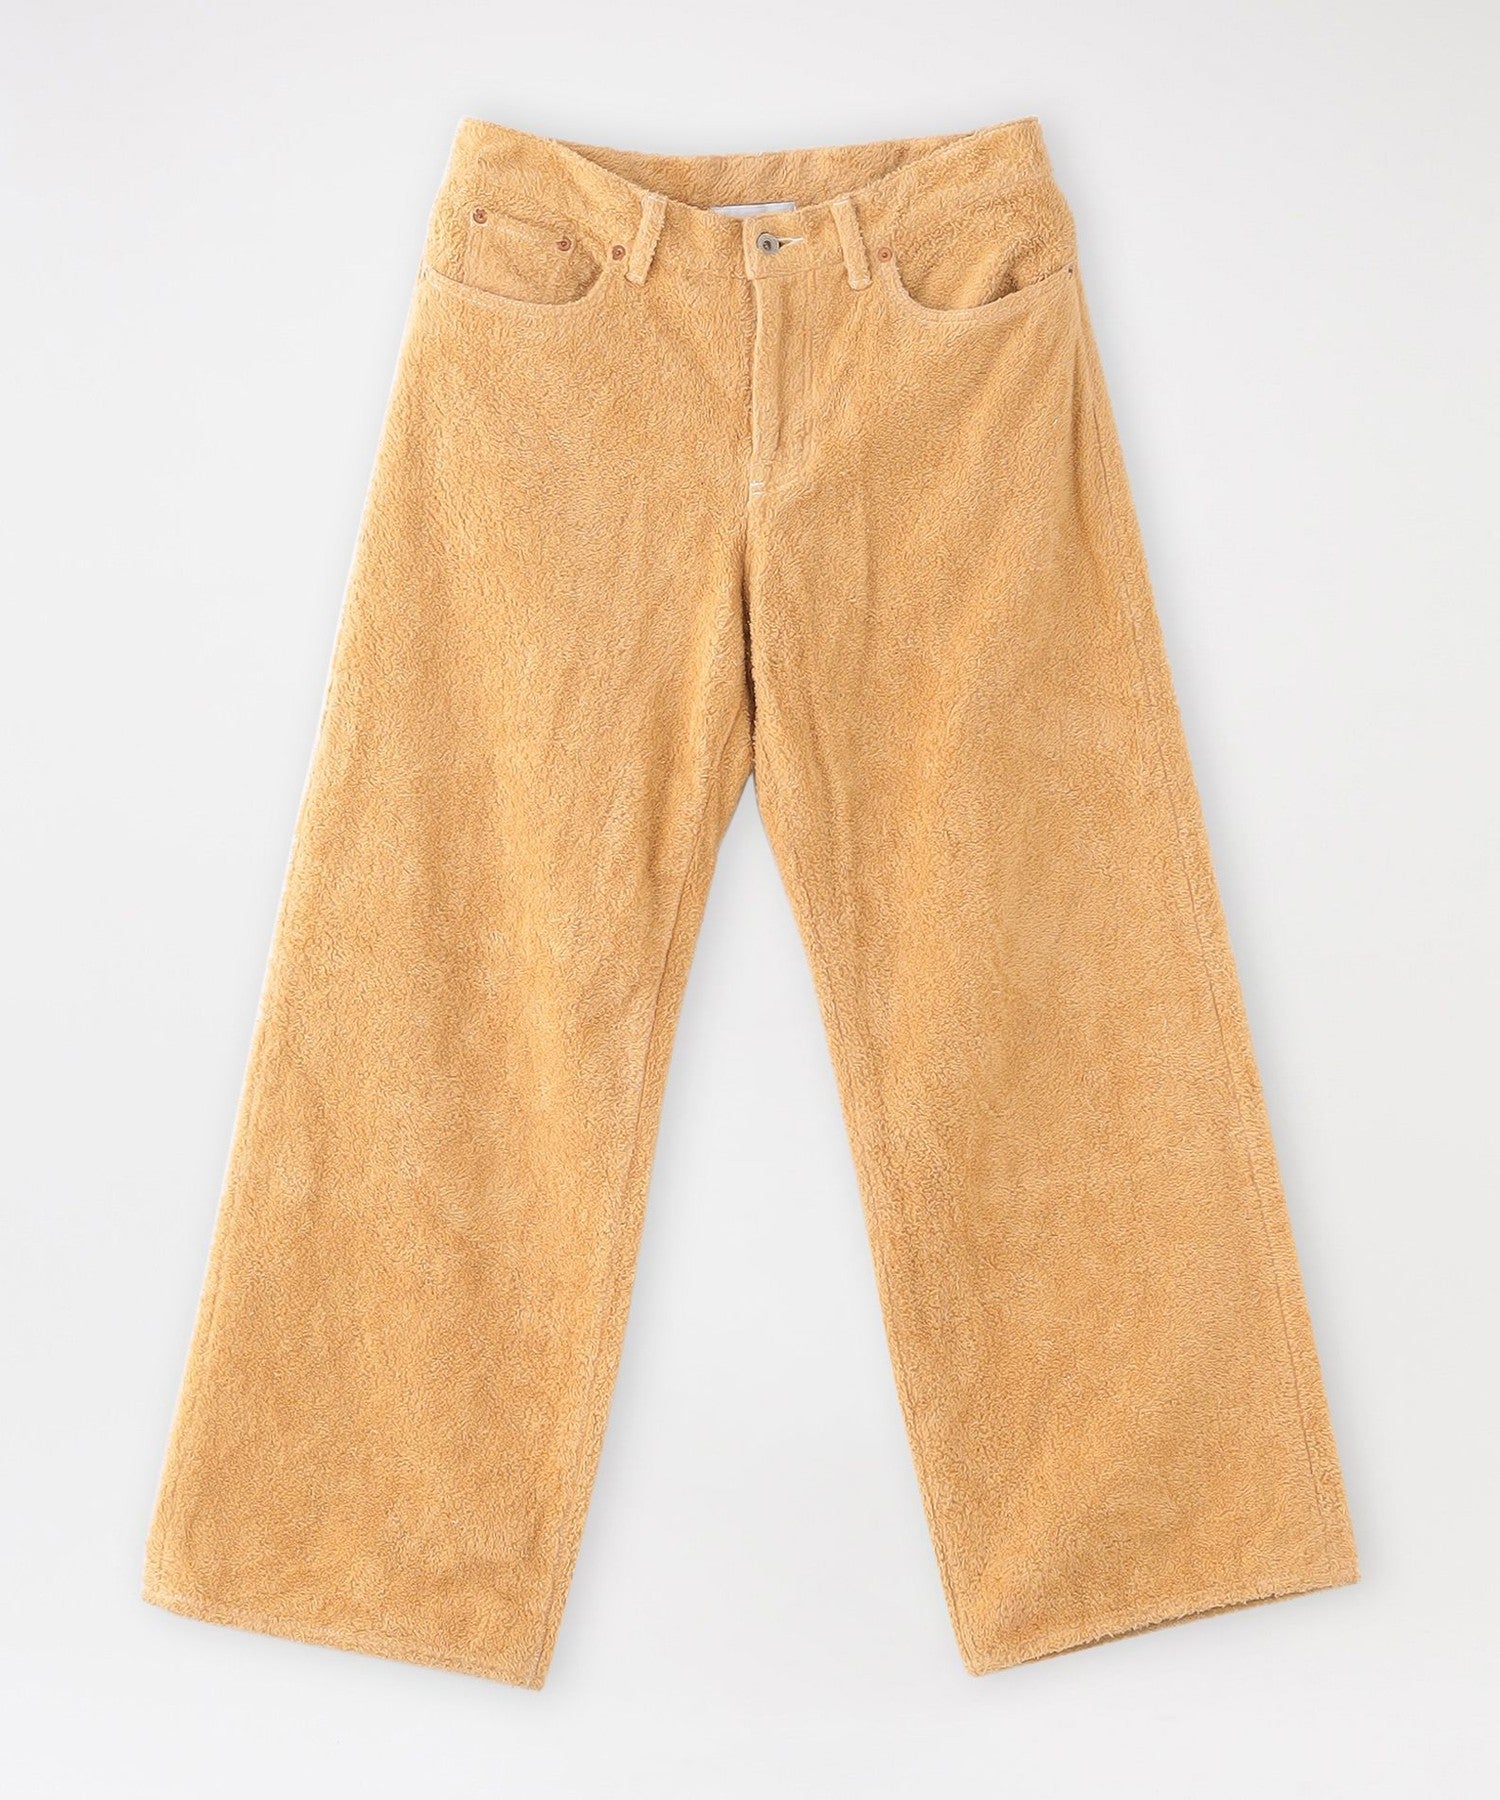 doublet】パンツ FUZZY LOW-RISE BUGGY PANTS 22AW19PT203(パンツ 